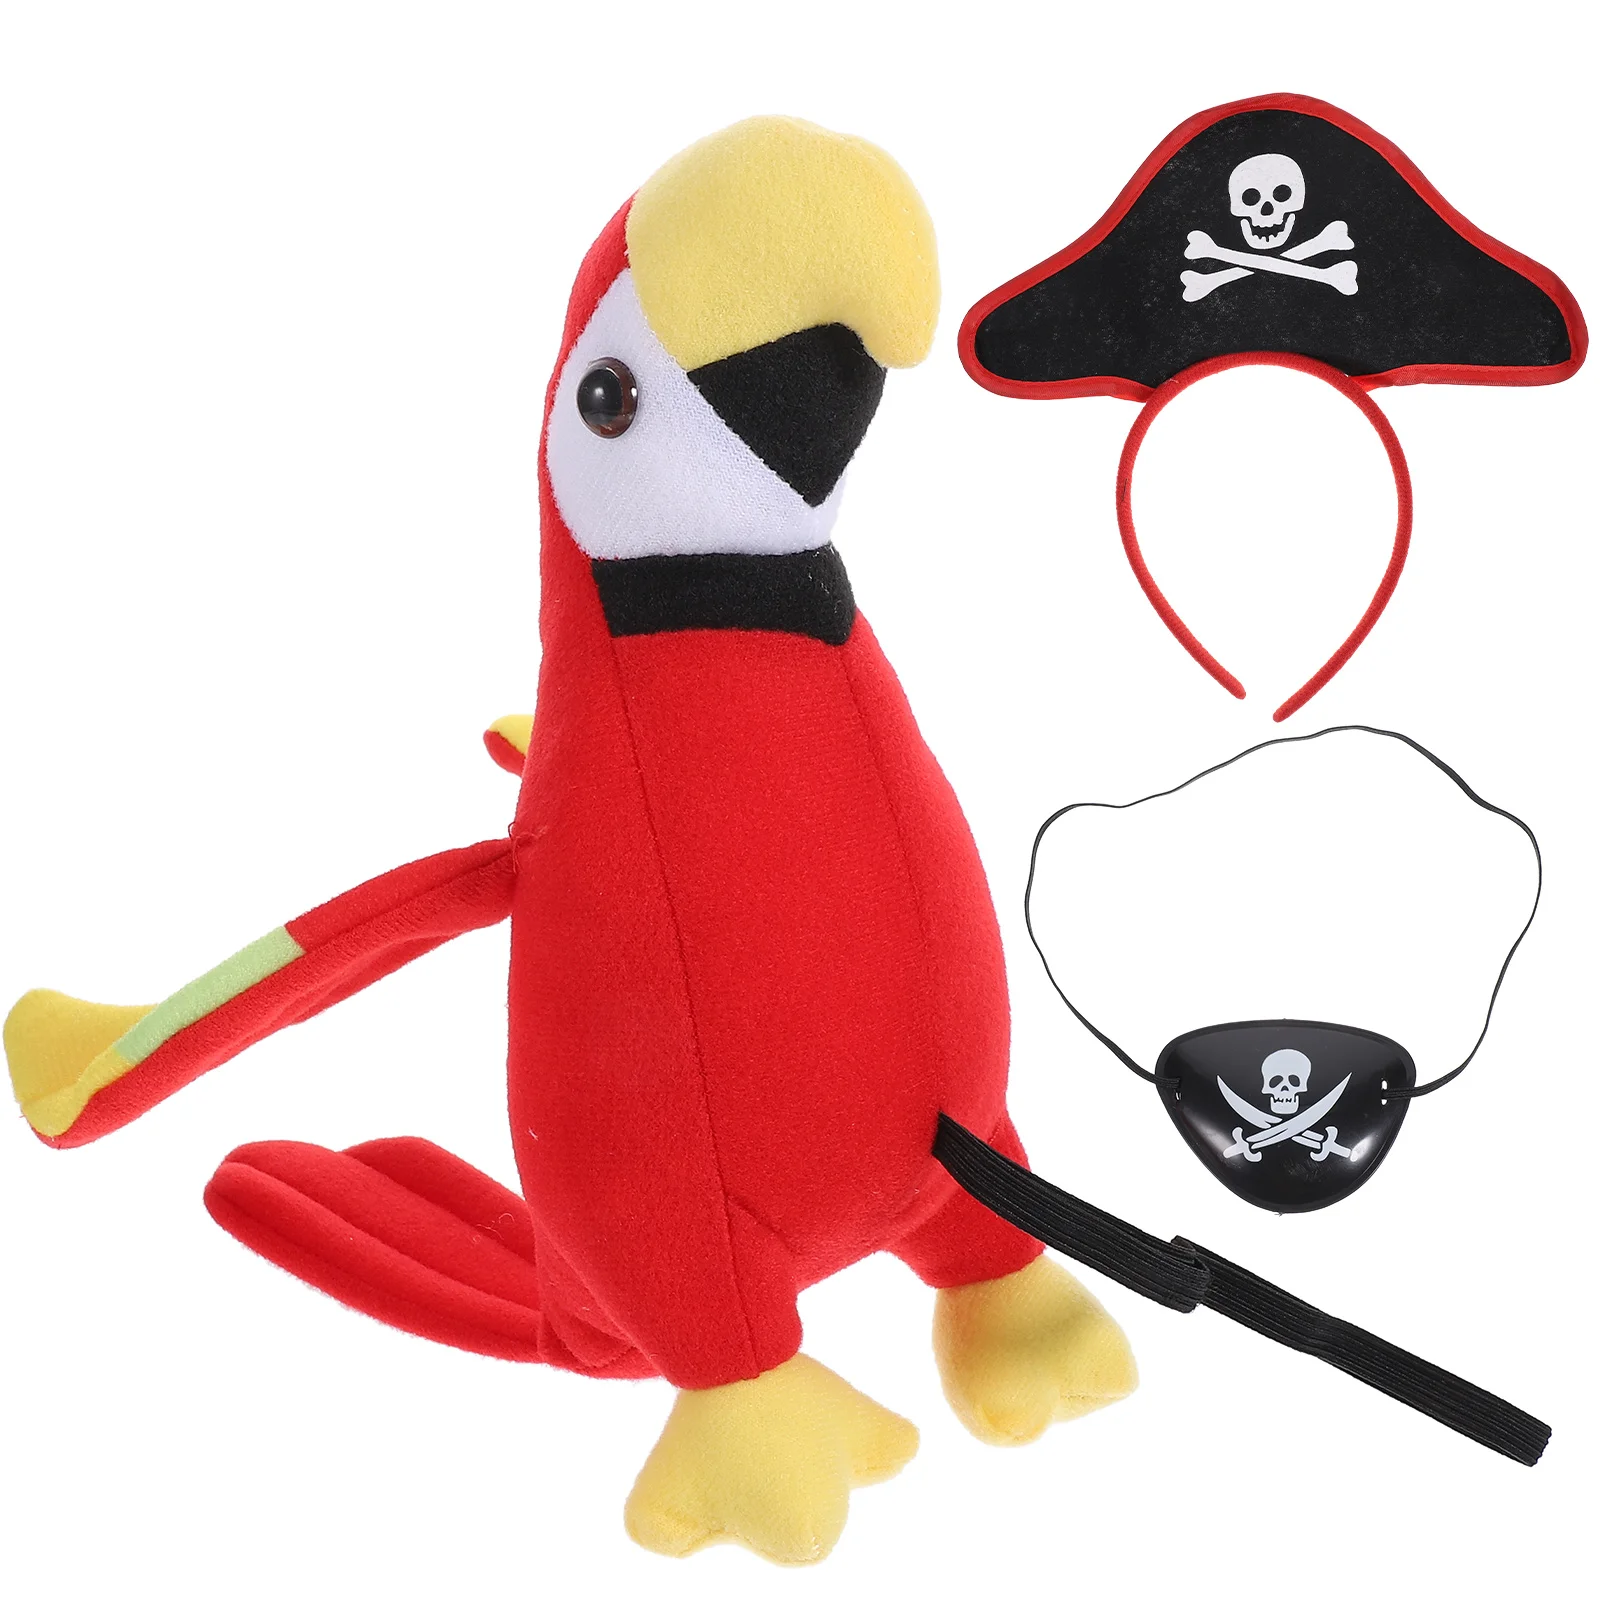 

Toys Pirate Costume Parrot Plush Bird Make Stuffed On Shoulder Accessory Eye Patches Headband Cosplay Child Themed Kids